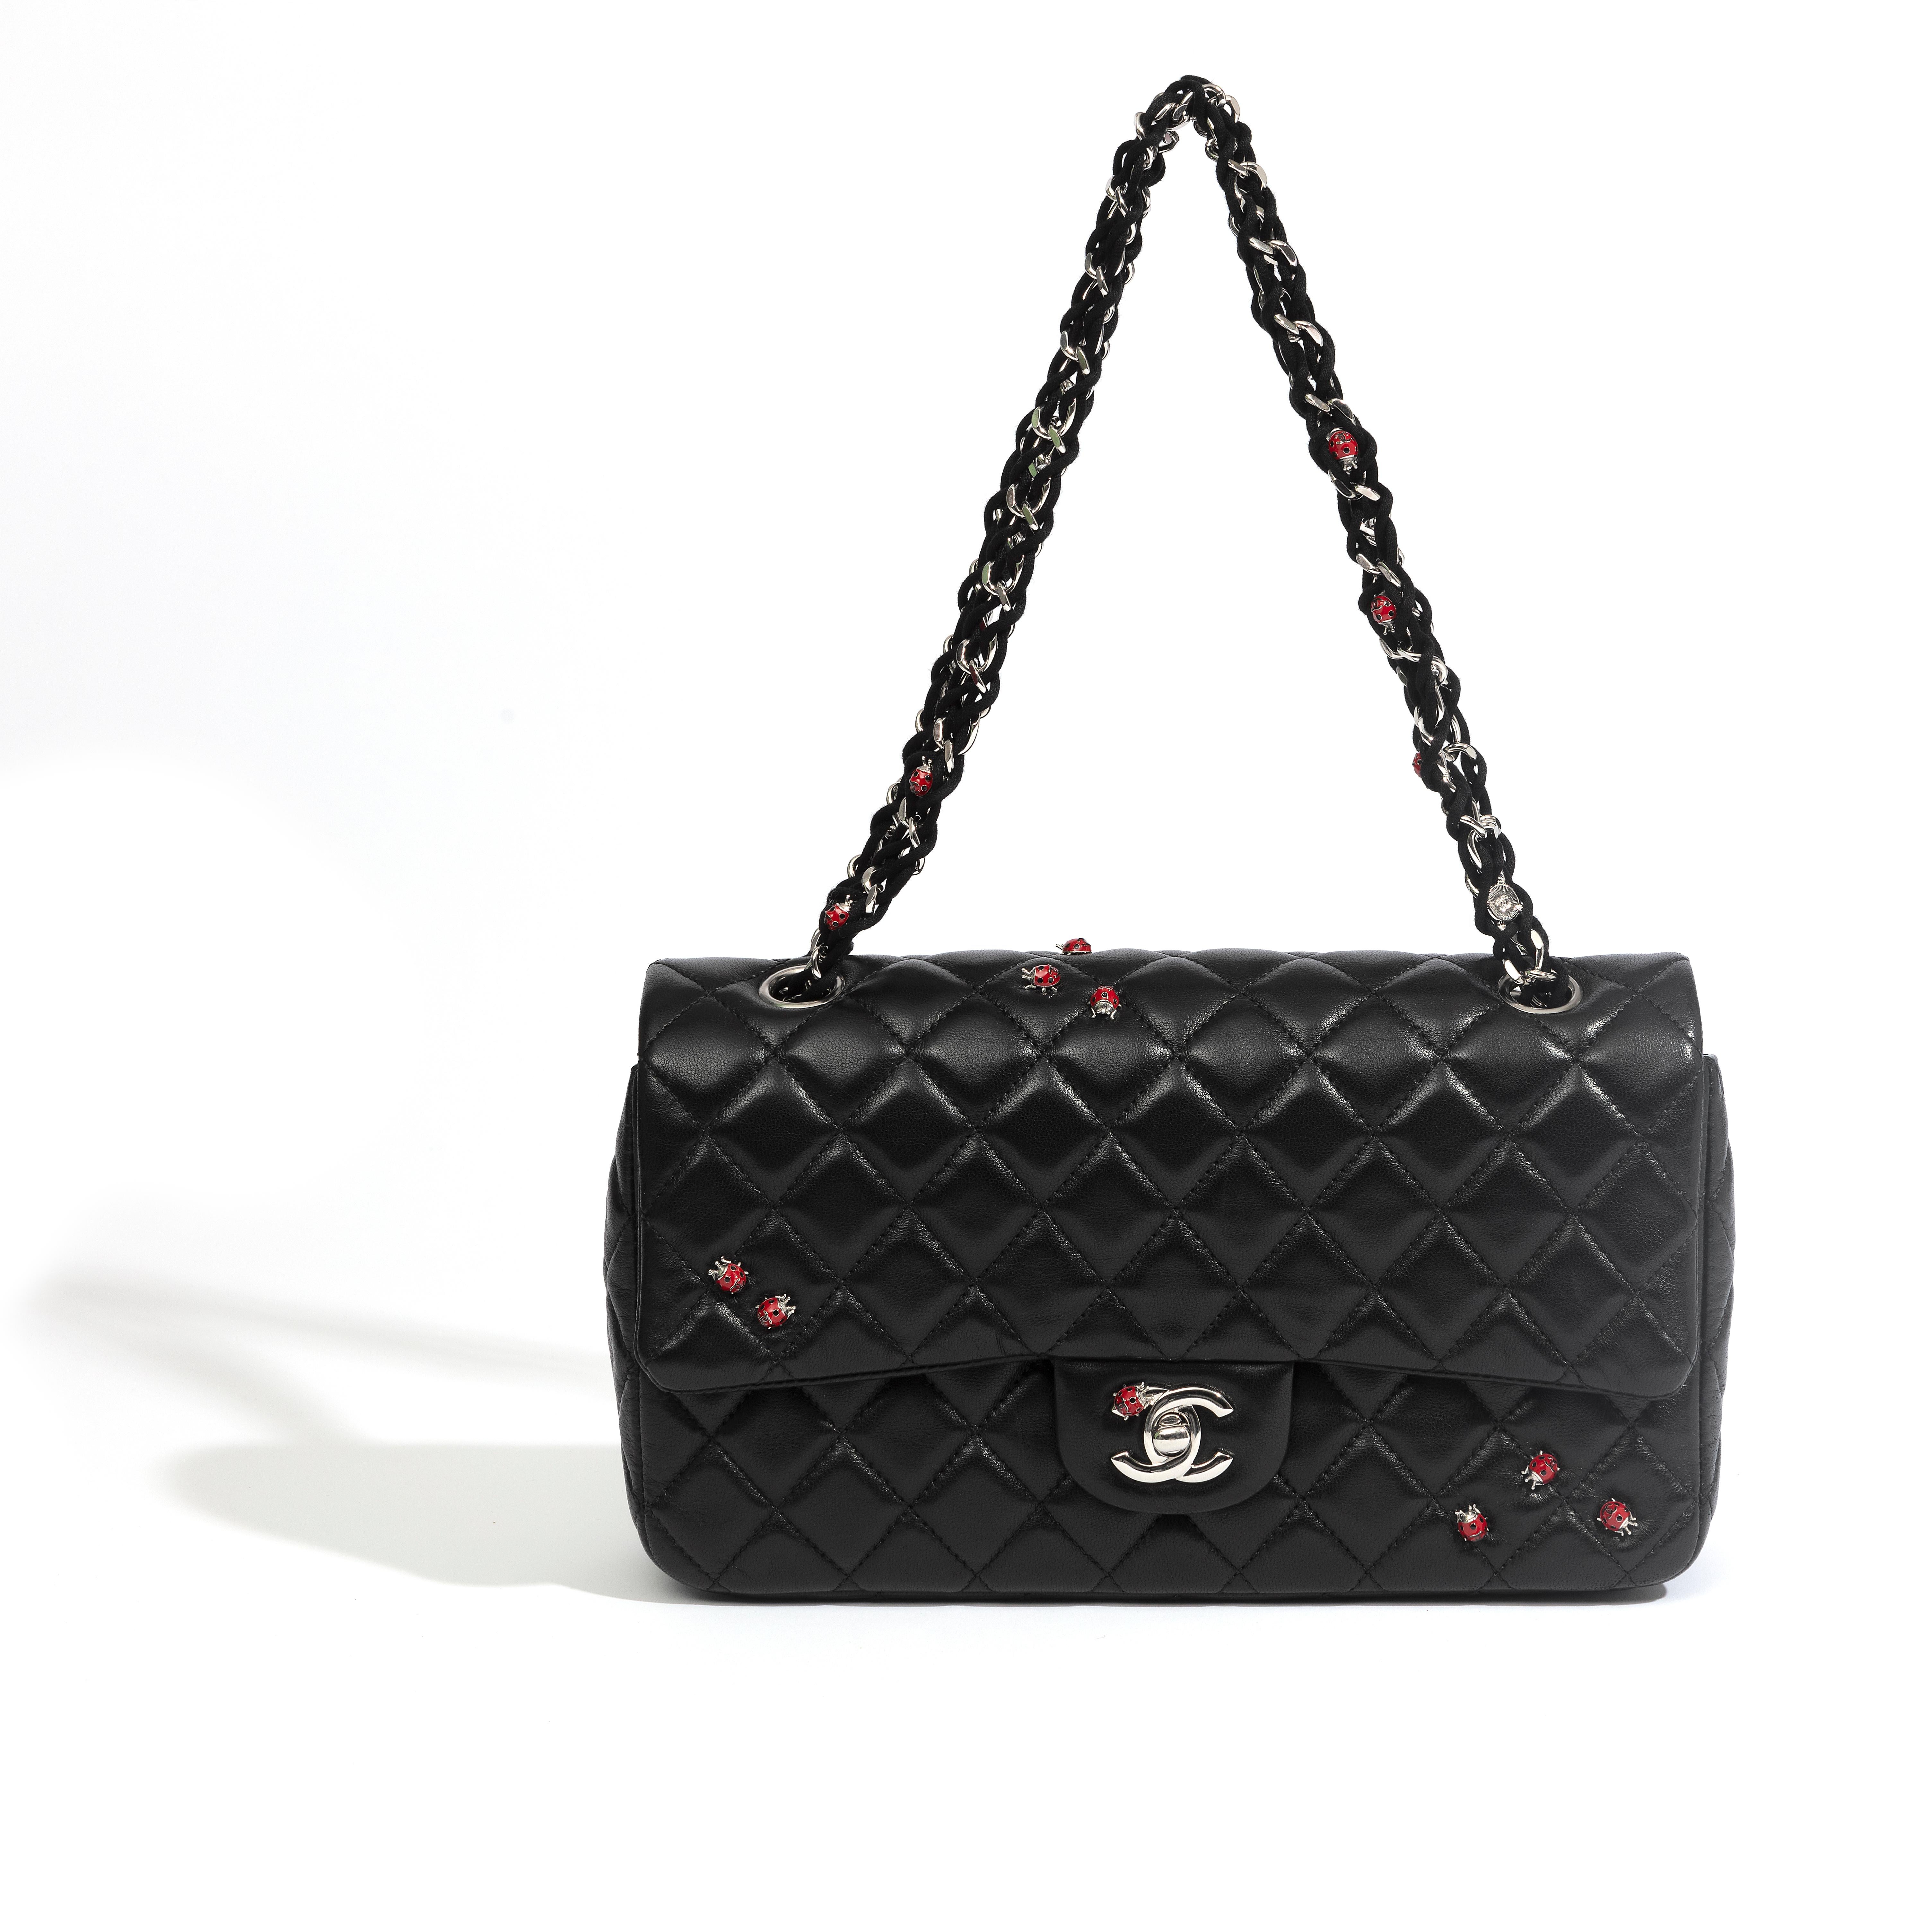 Chanel Classic Medium Ladybug Flap In Excellent Condition For Sale In London, GB